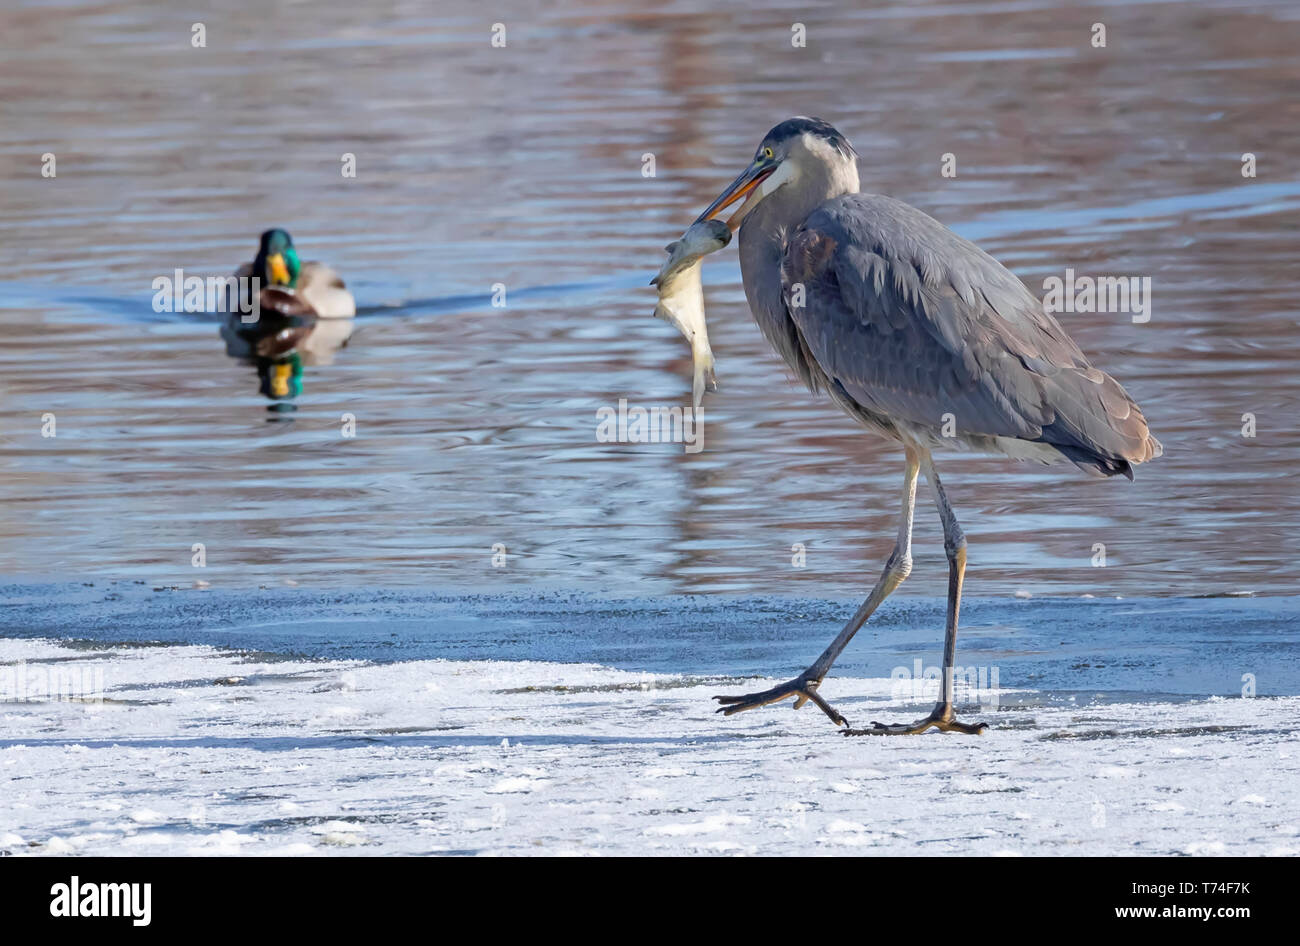 Great blue heron (Ardea herodias) with a fish in it's mouth; Fort Collins, Colorado, United States of America Stock Photo